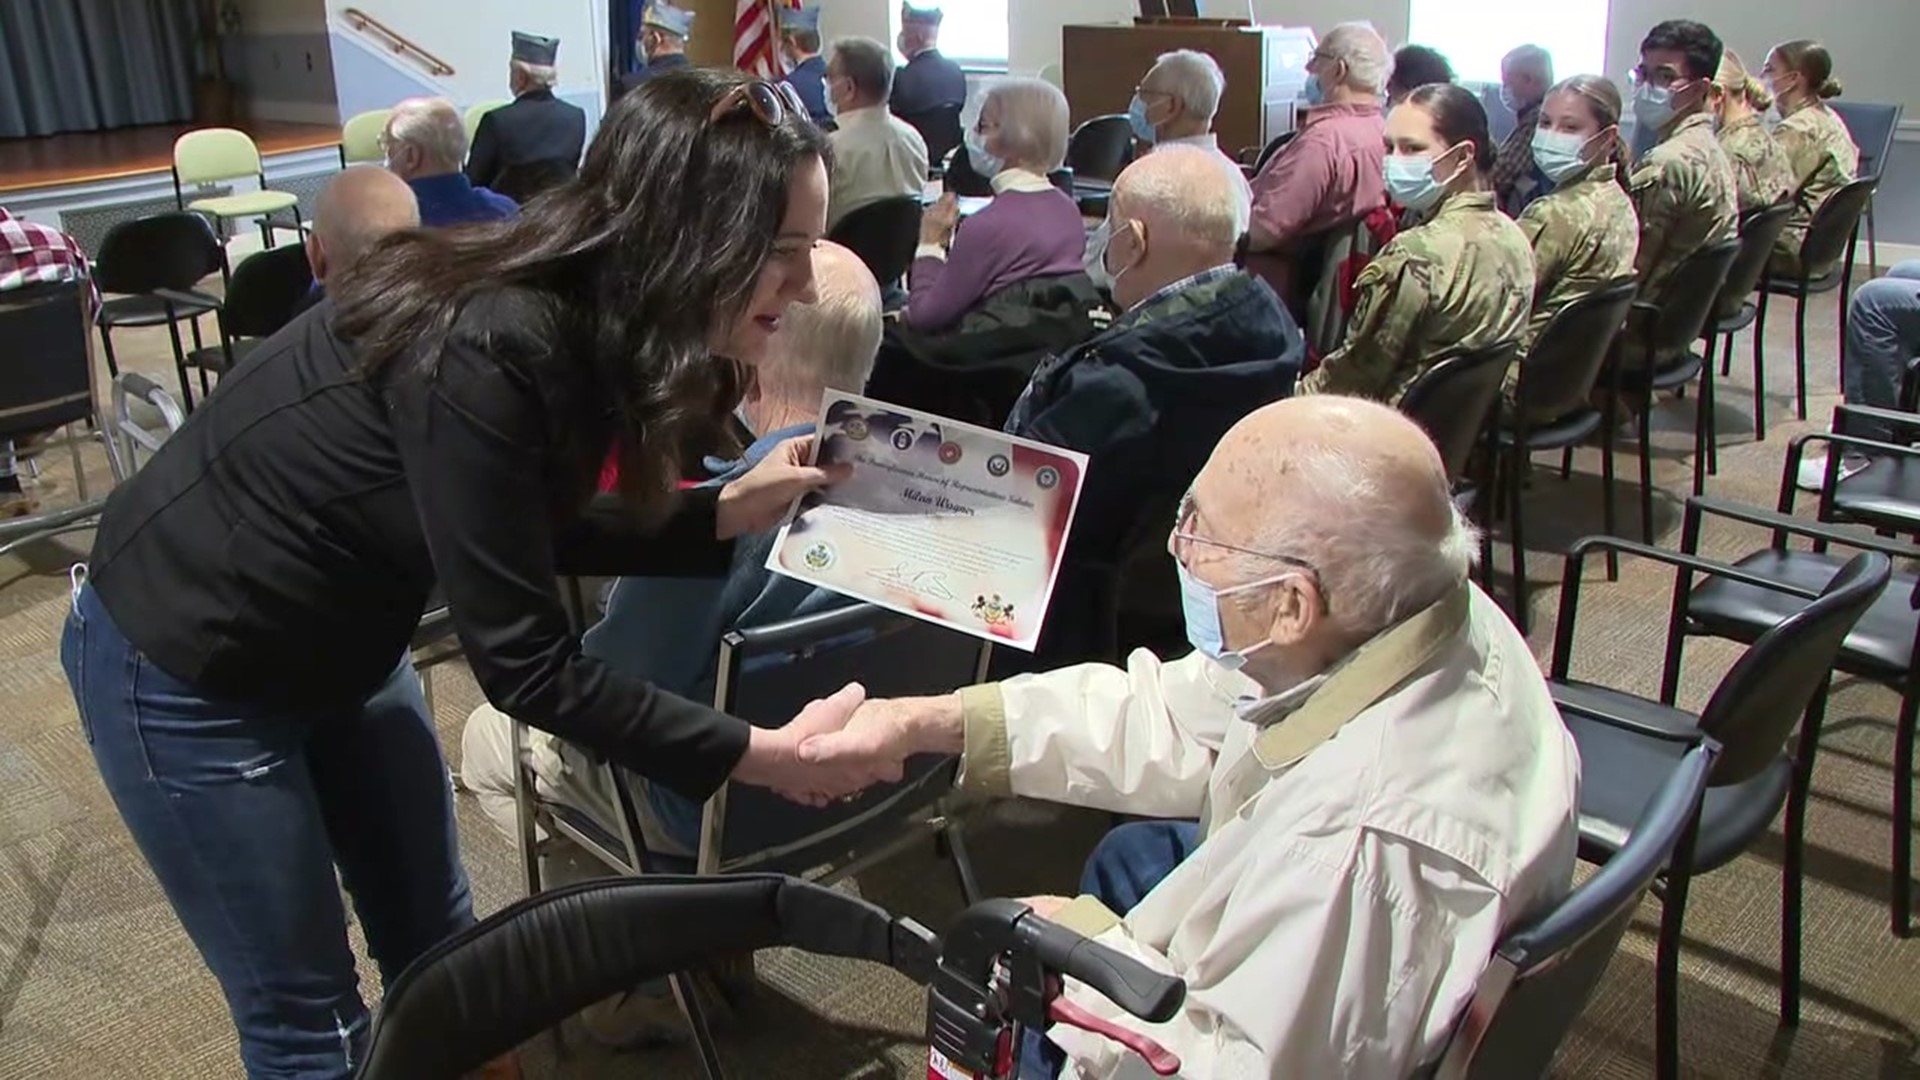 Newswatch 16's Nikki Krize shares how a senior living community near Lewisburg paid tribute to its veterans in a special ceremony.